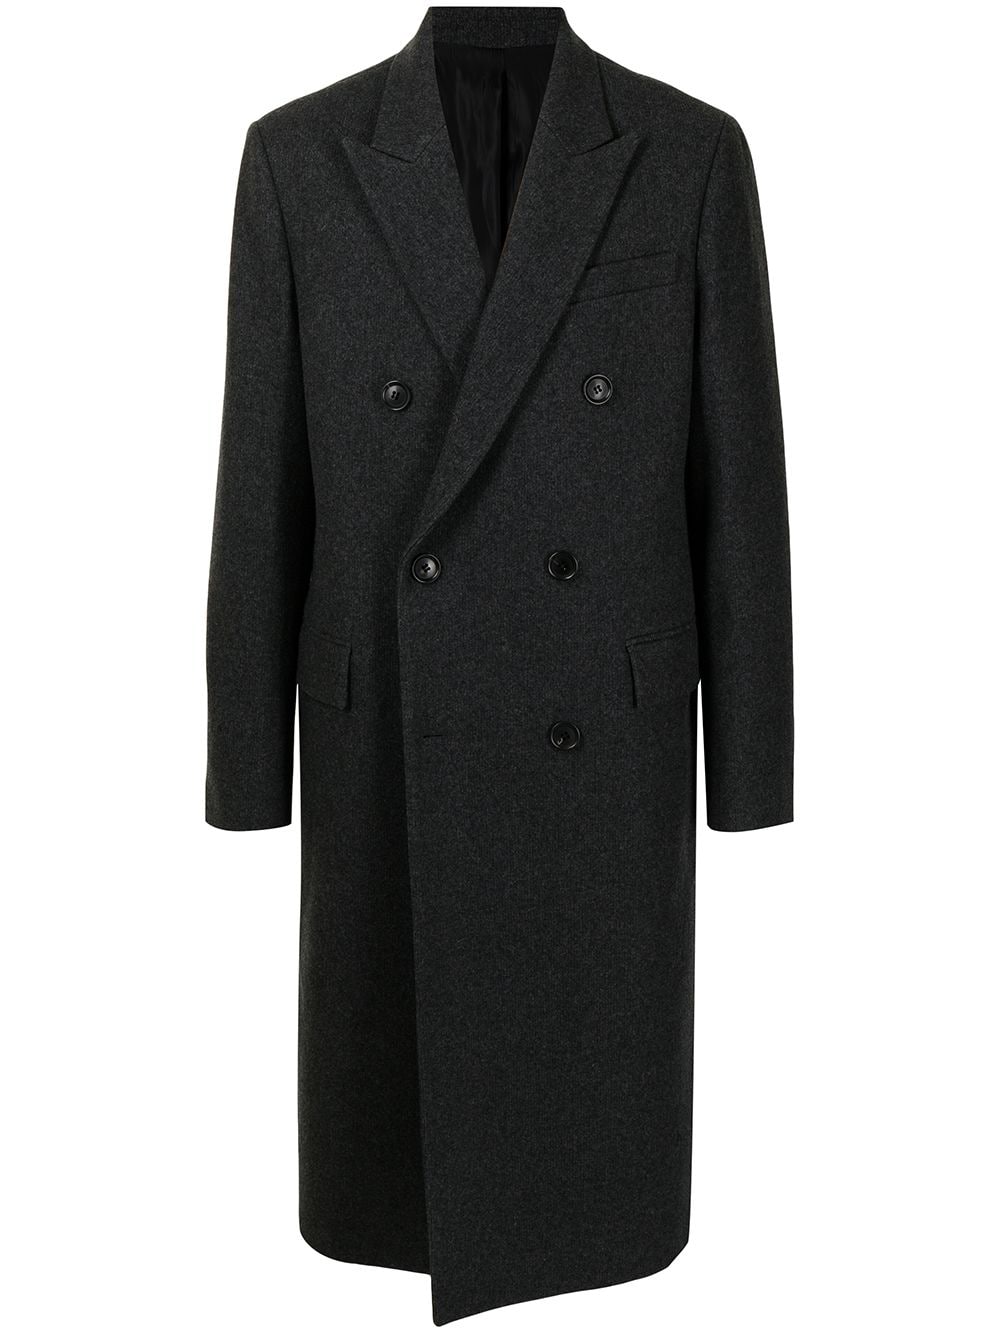 Shop Juun.J tailored double-breasted coat with Express Delivery - FARFETCH